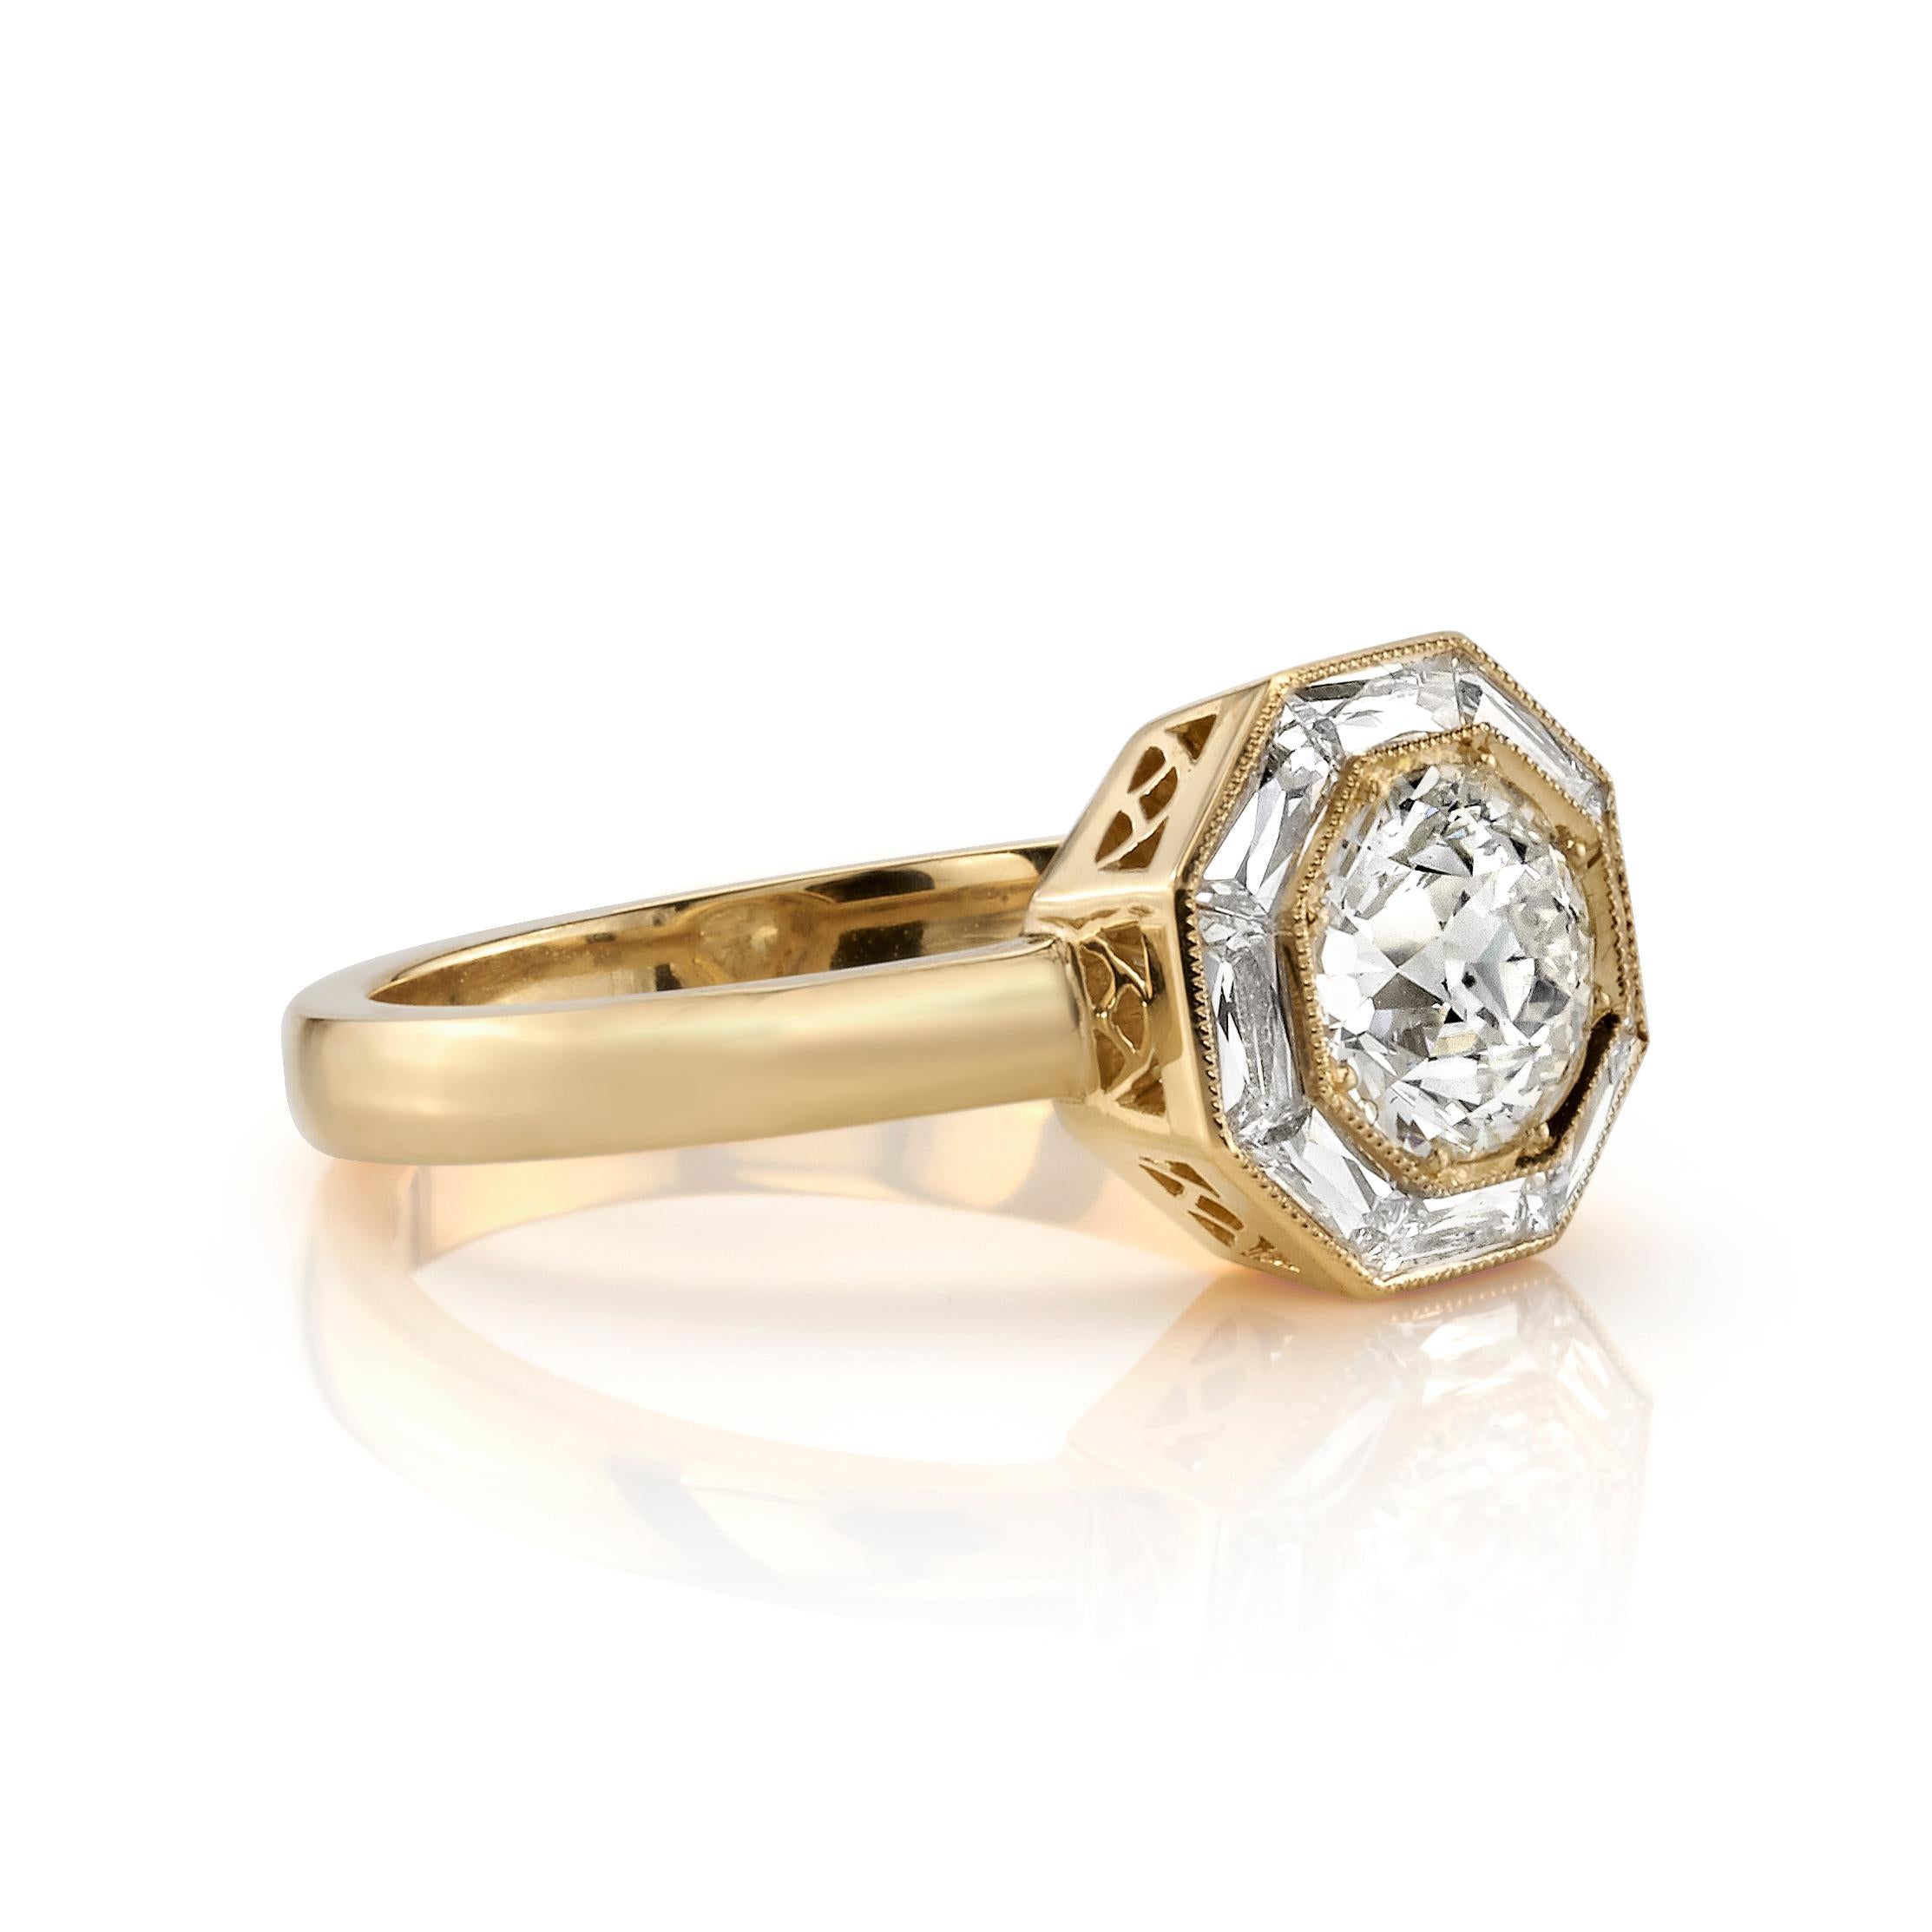 1.00ct K/SI1 GIA certified old European cut diamond with 0.46ctw french cut accent stones set in a handcrafted 18K yellow gold halo mounting. Ring is currently a size 6 and can be sized to fit.
 